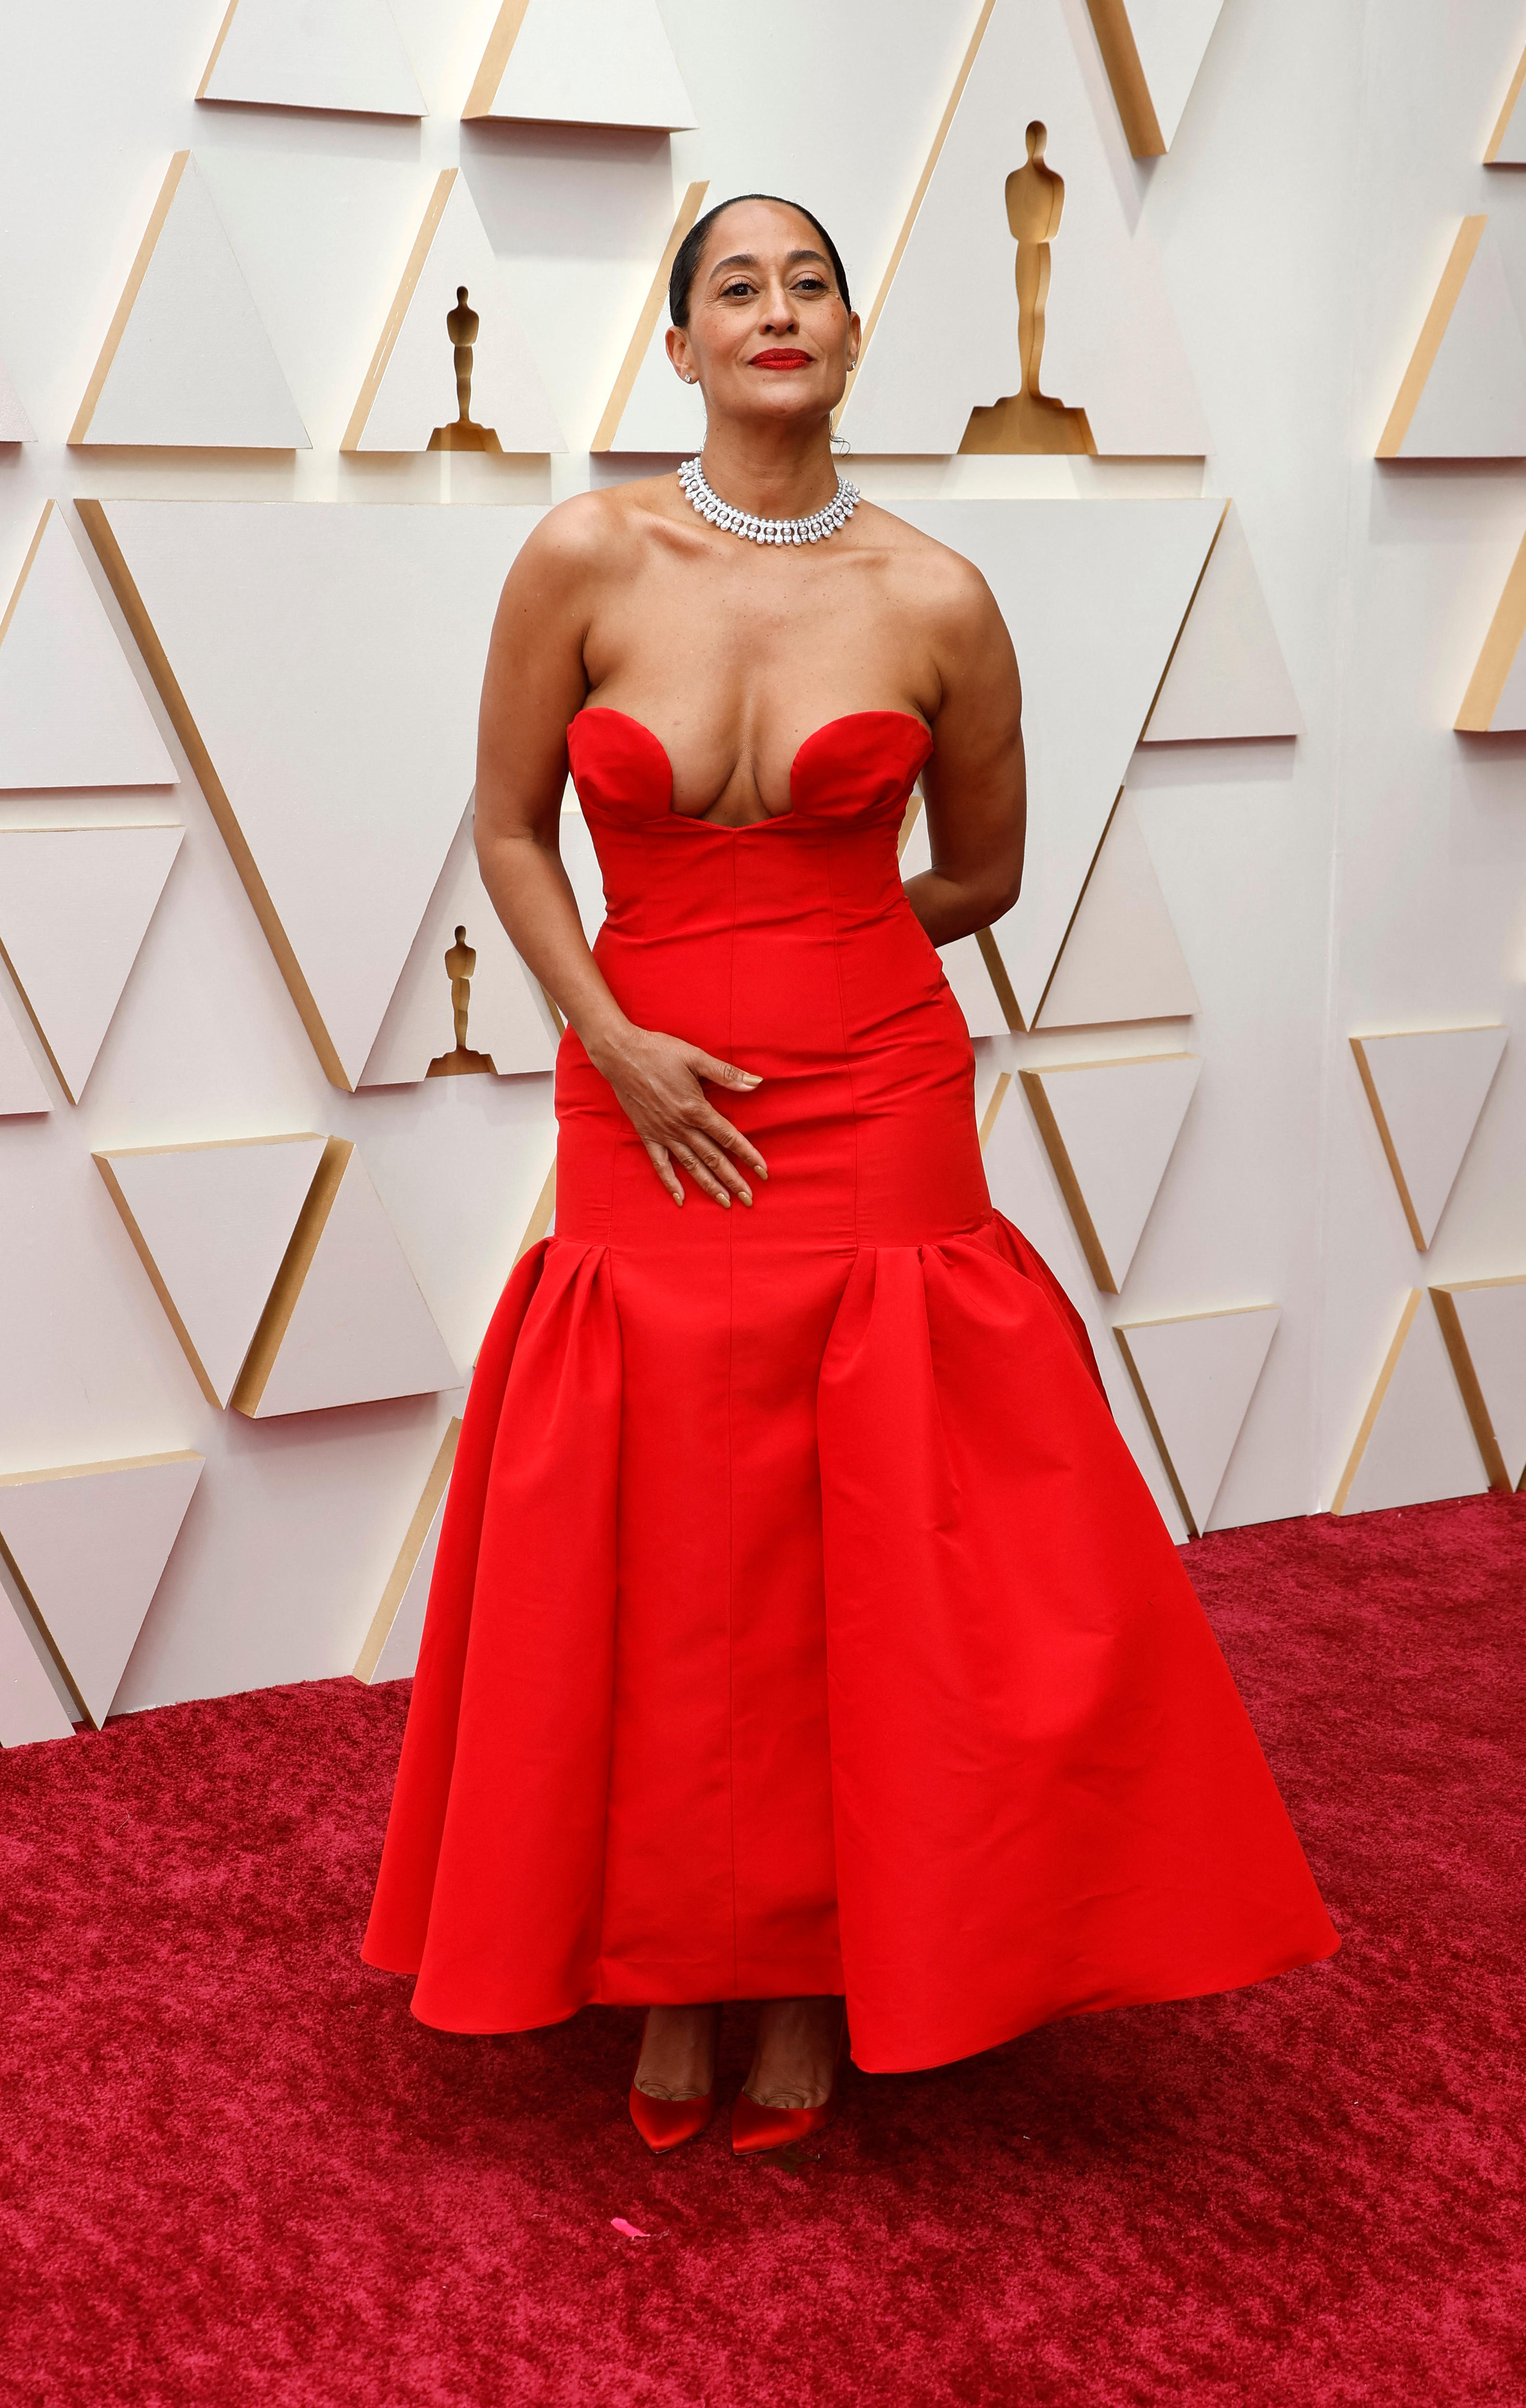 A woman wearing a long red dress stands on a red carpet in front of a white media wall for the Oscars.